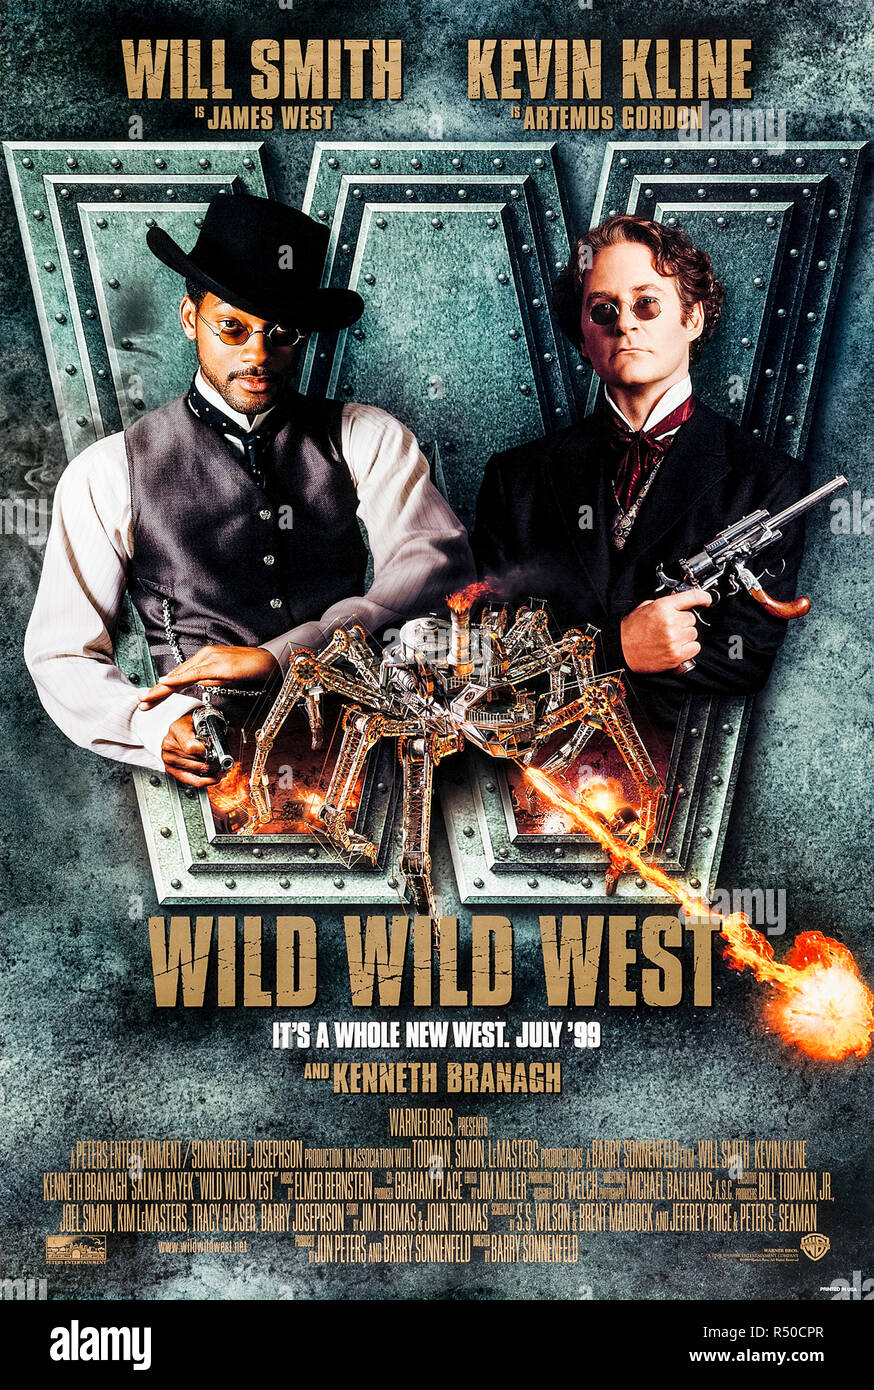 Wild Wild West (1999) directed by Barry Sonnenfeld and starring Will Smith, Kevin Kline, Kenneth Branagh and Salma Hayek. Two hired guns go after a renegade inventor trying to assassinate President Ulysses S. Grant. Photograph of original 1999 US poster ***EDITORIAL USE ONLY***. Credit: BFA / Warner Bros. Stock Photo